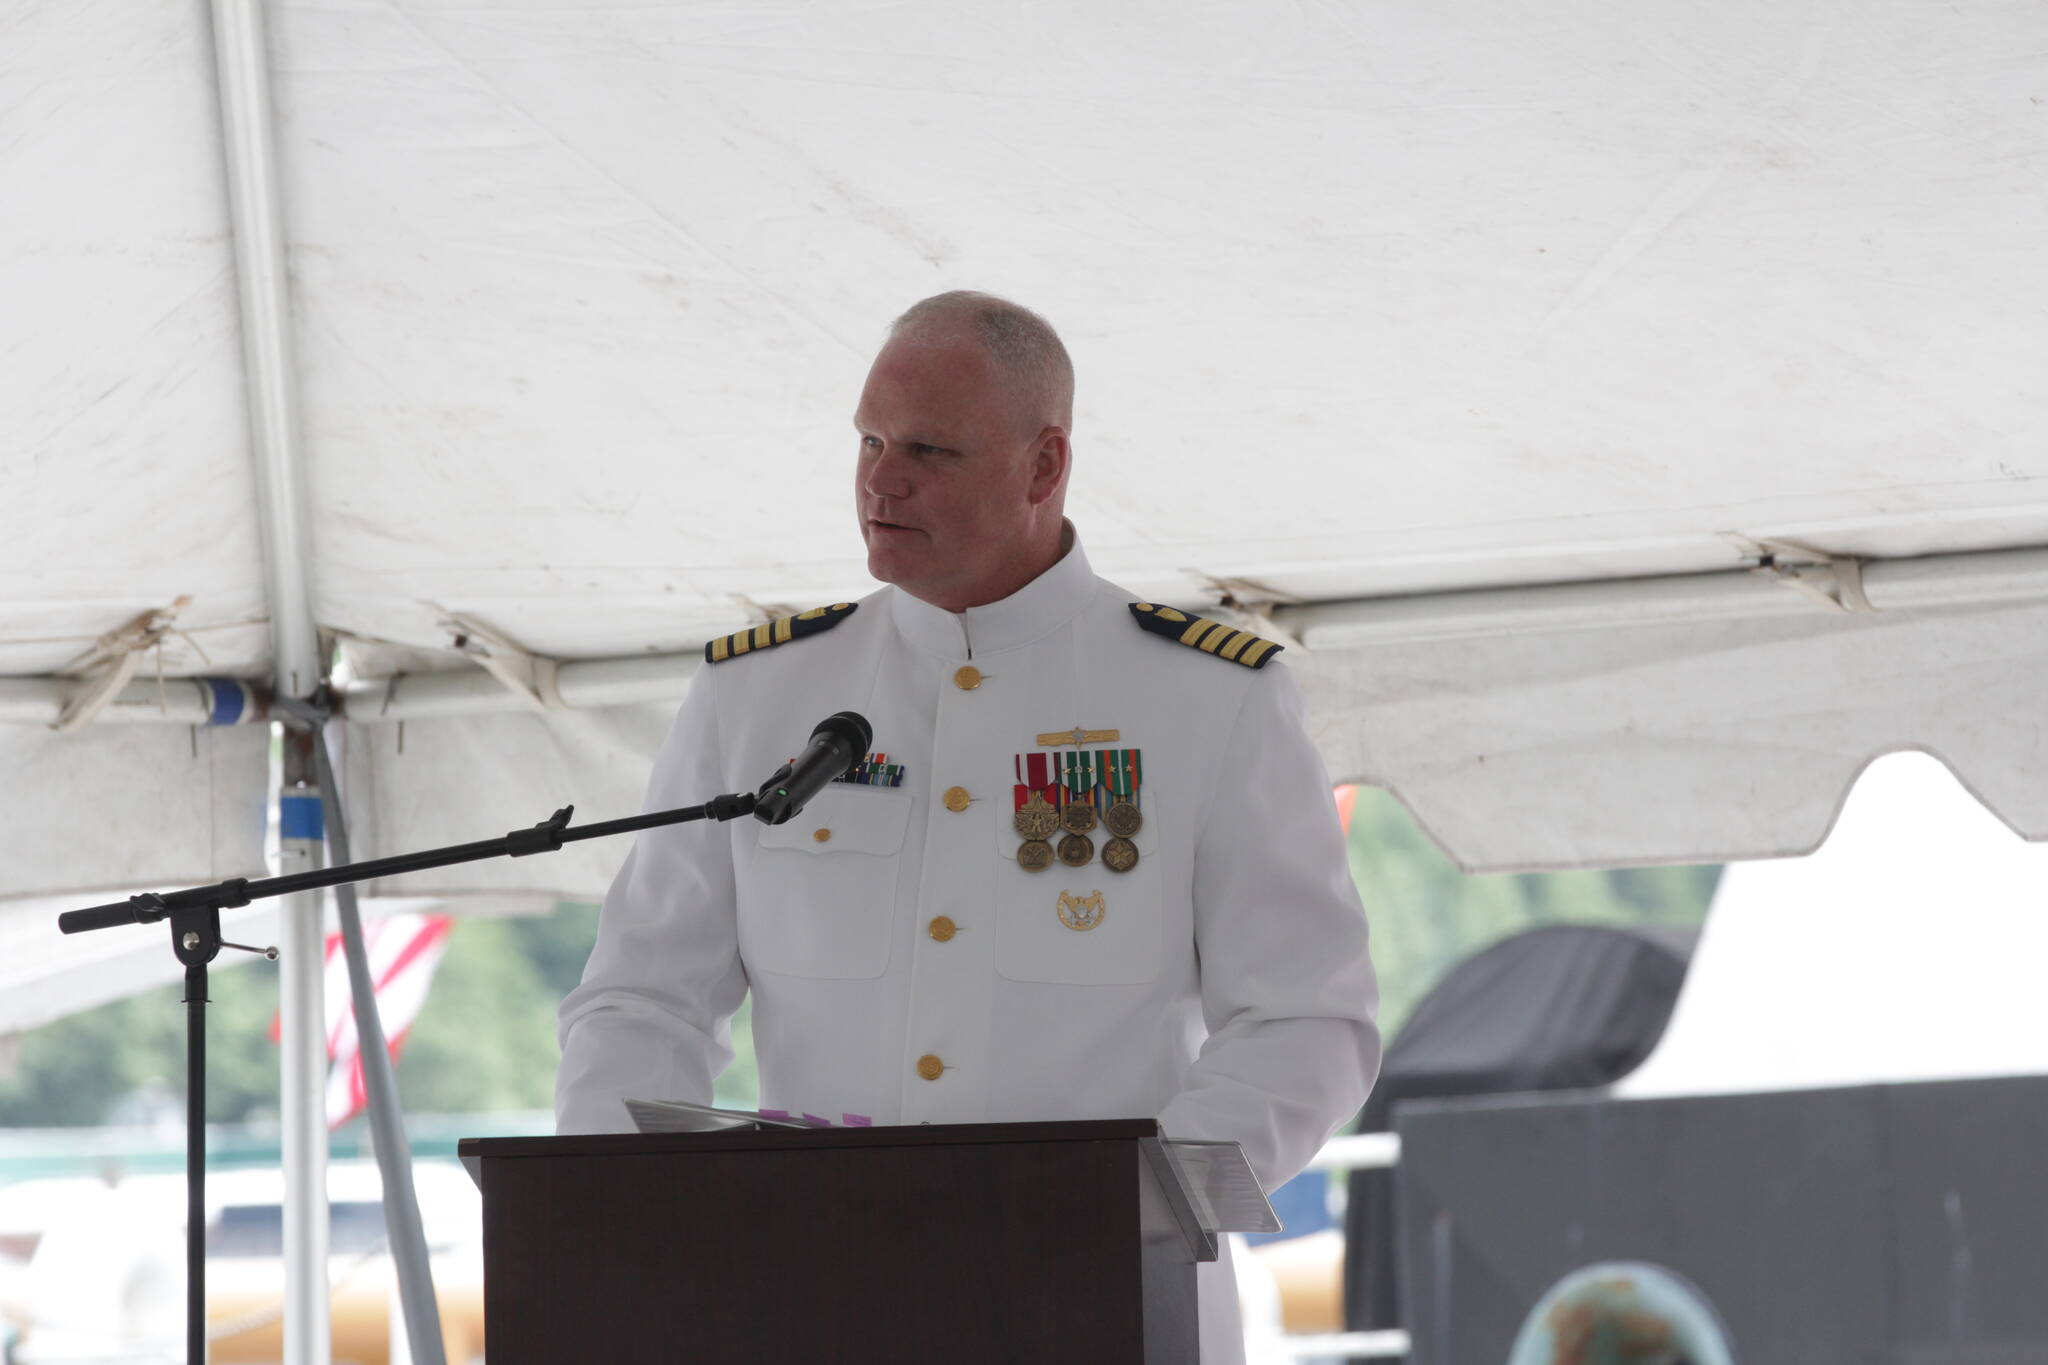 Michael S. Lockett / Juneau Empire
Capt. Darwin R. Jensen, Sector Juneau’s new commander, speaks during the change of command ceremony at the station on July 7, 2021.